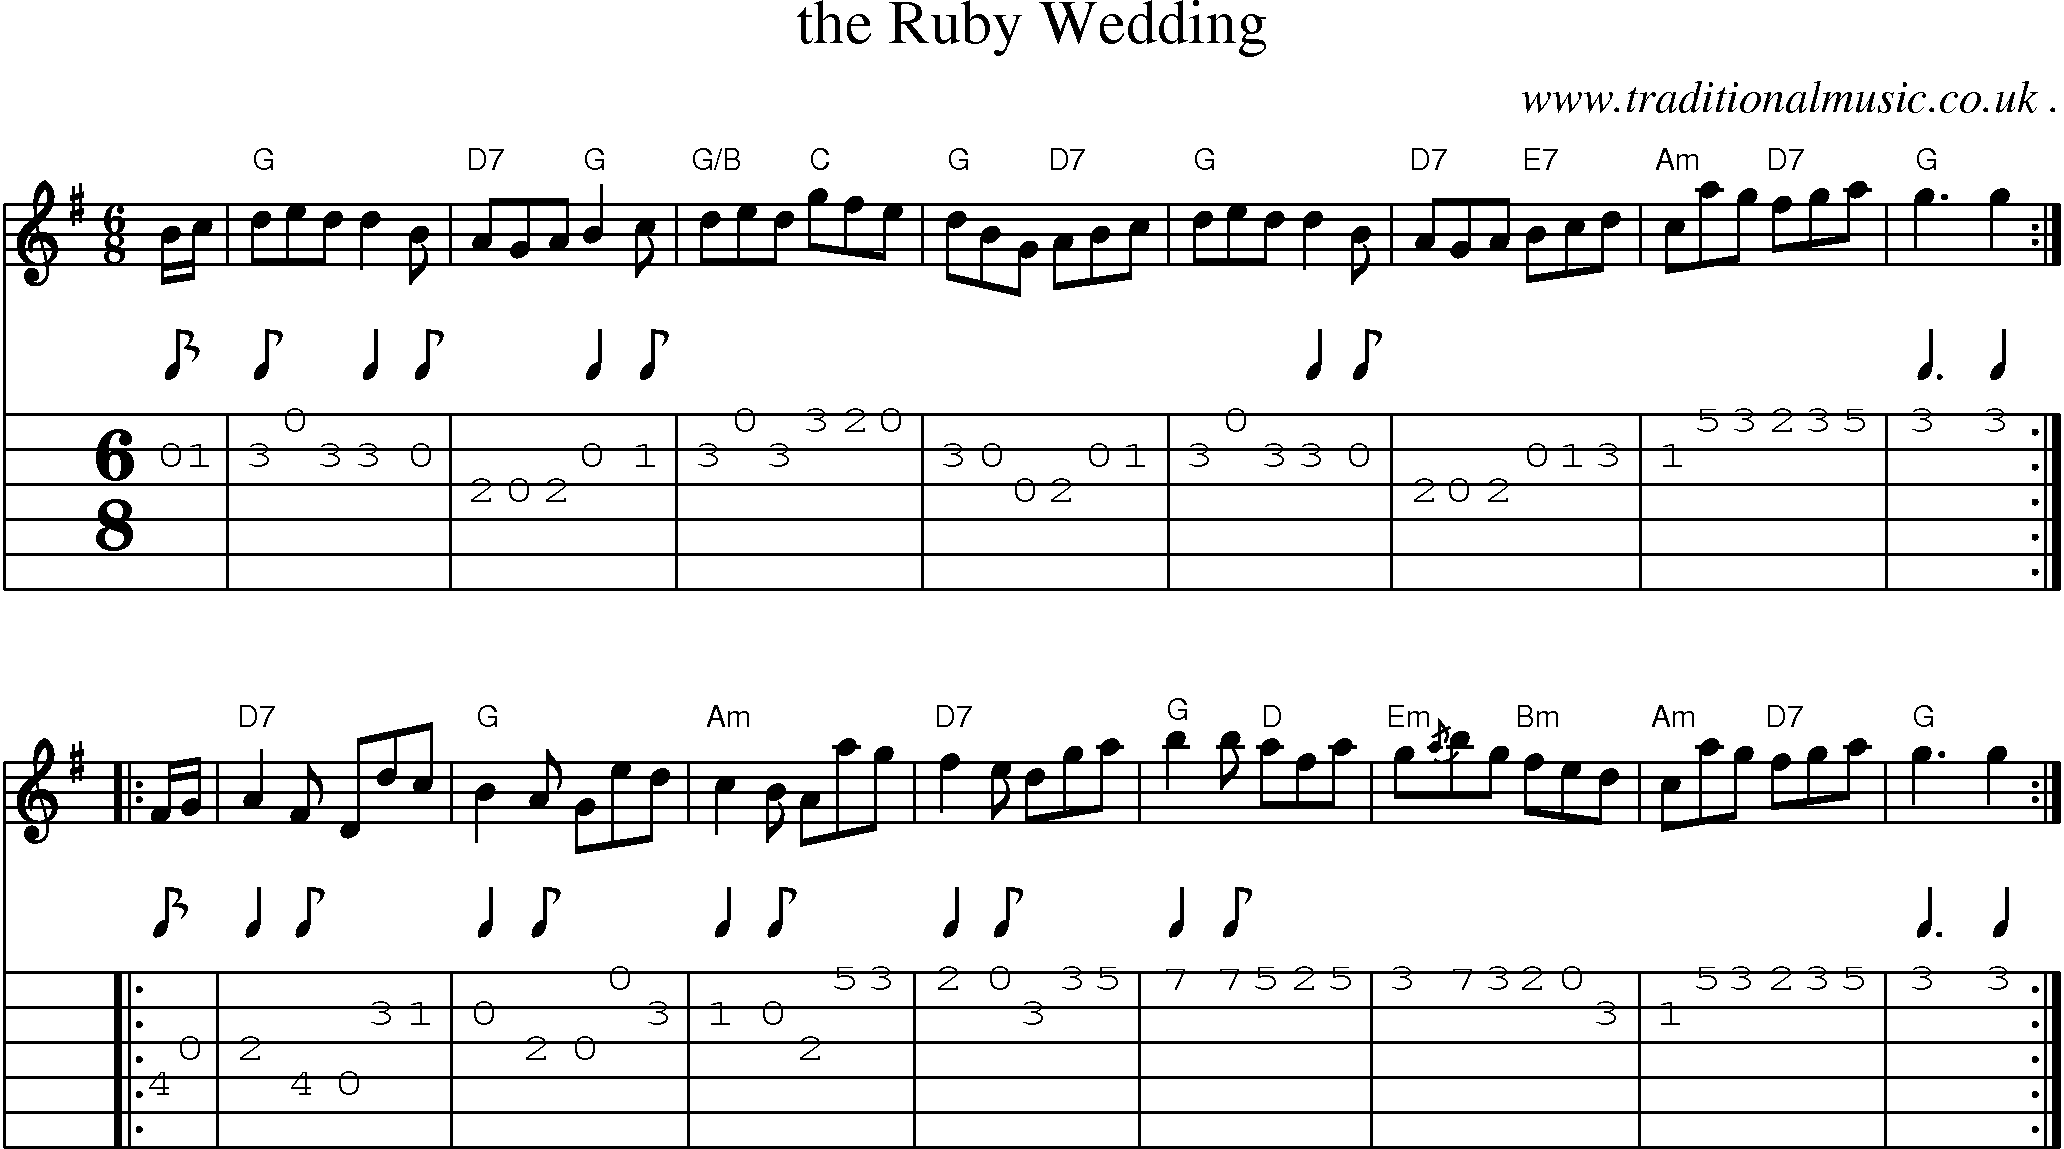 Sheet-music  score, Chords and Guitar Tabs for The Ruby Wedding